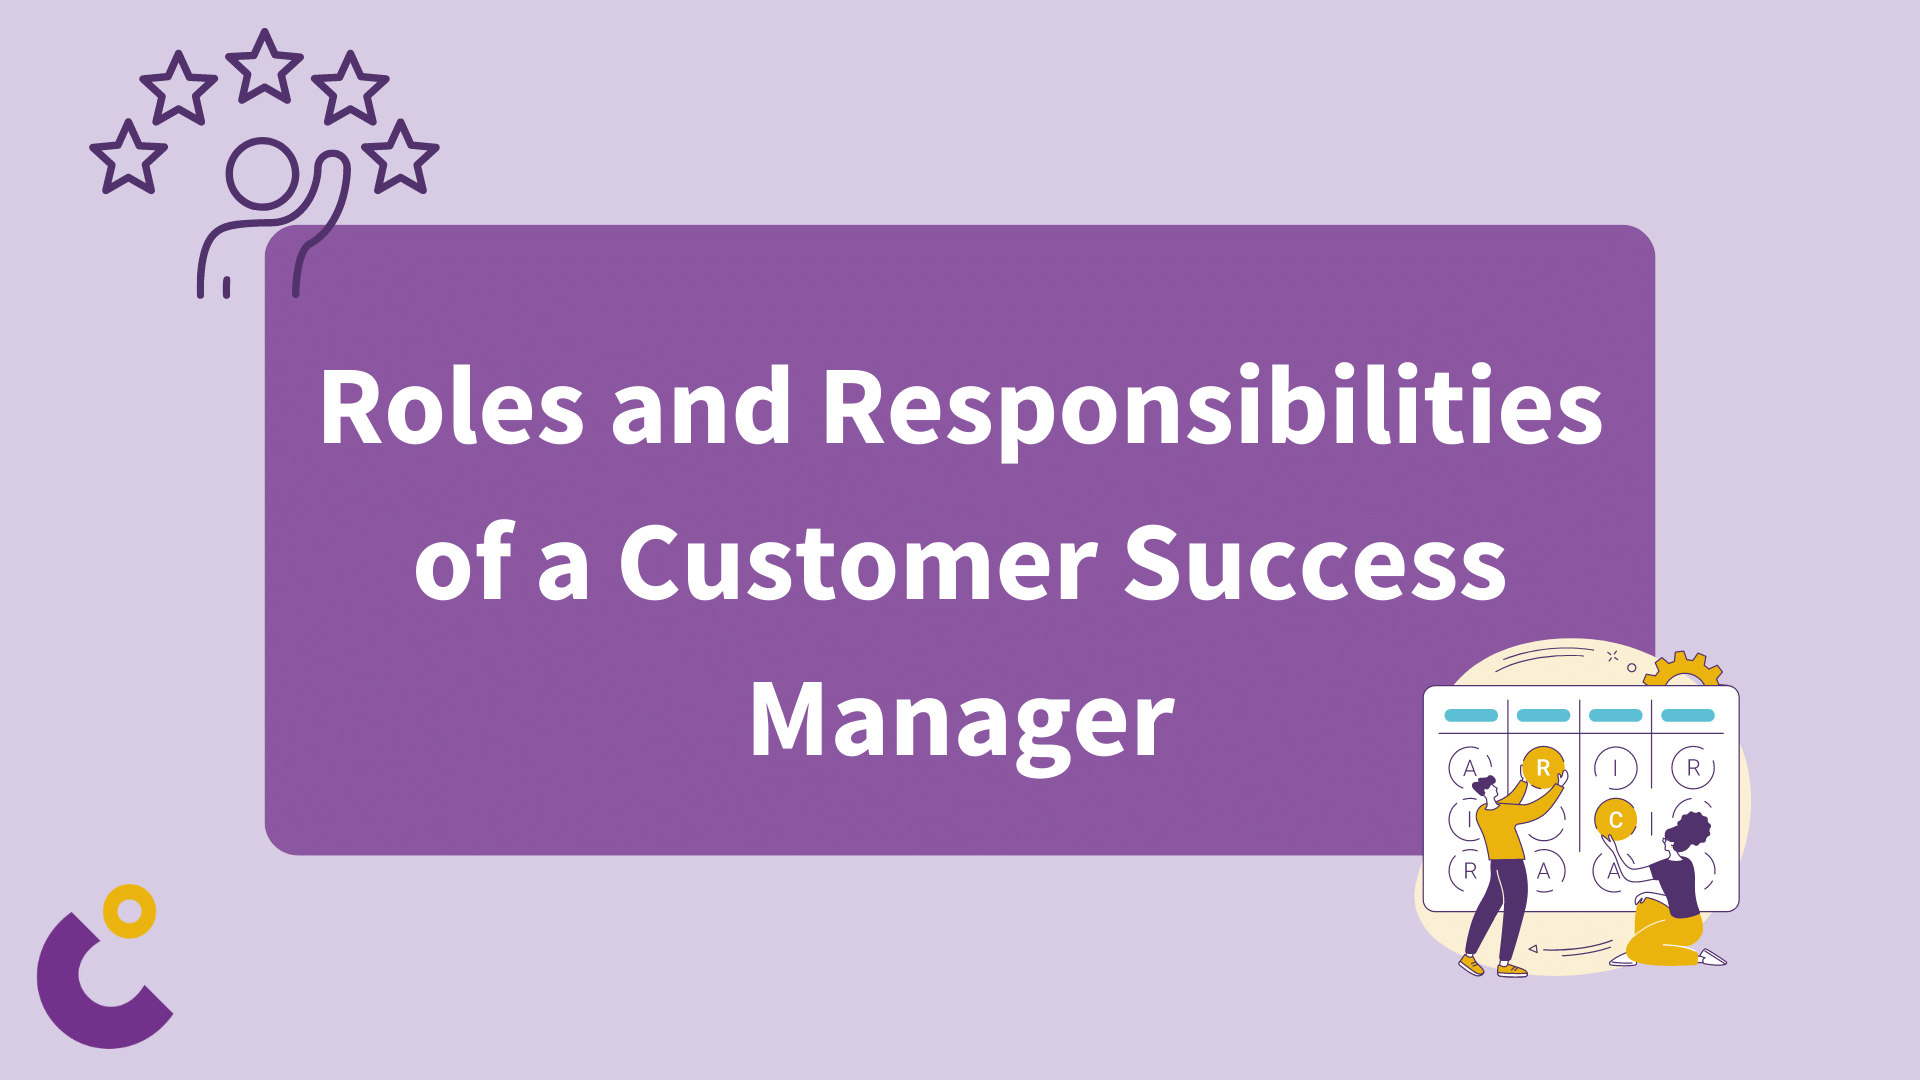 Roles and Responsibilities of a customer success manager